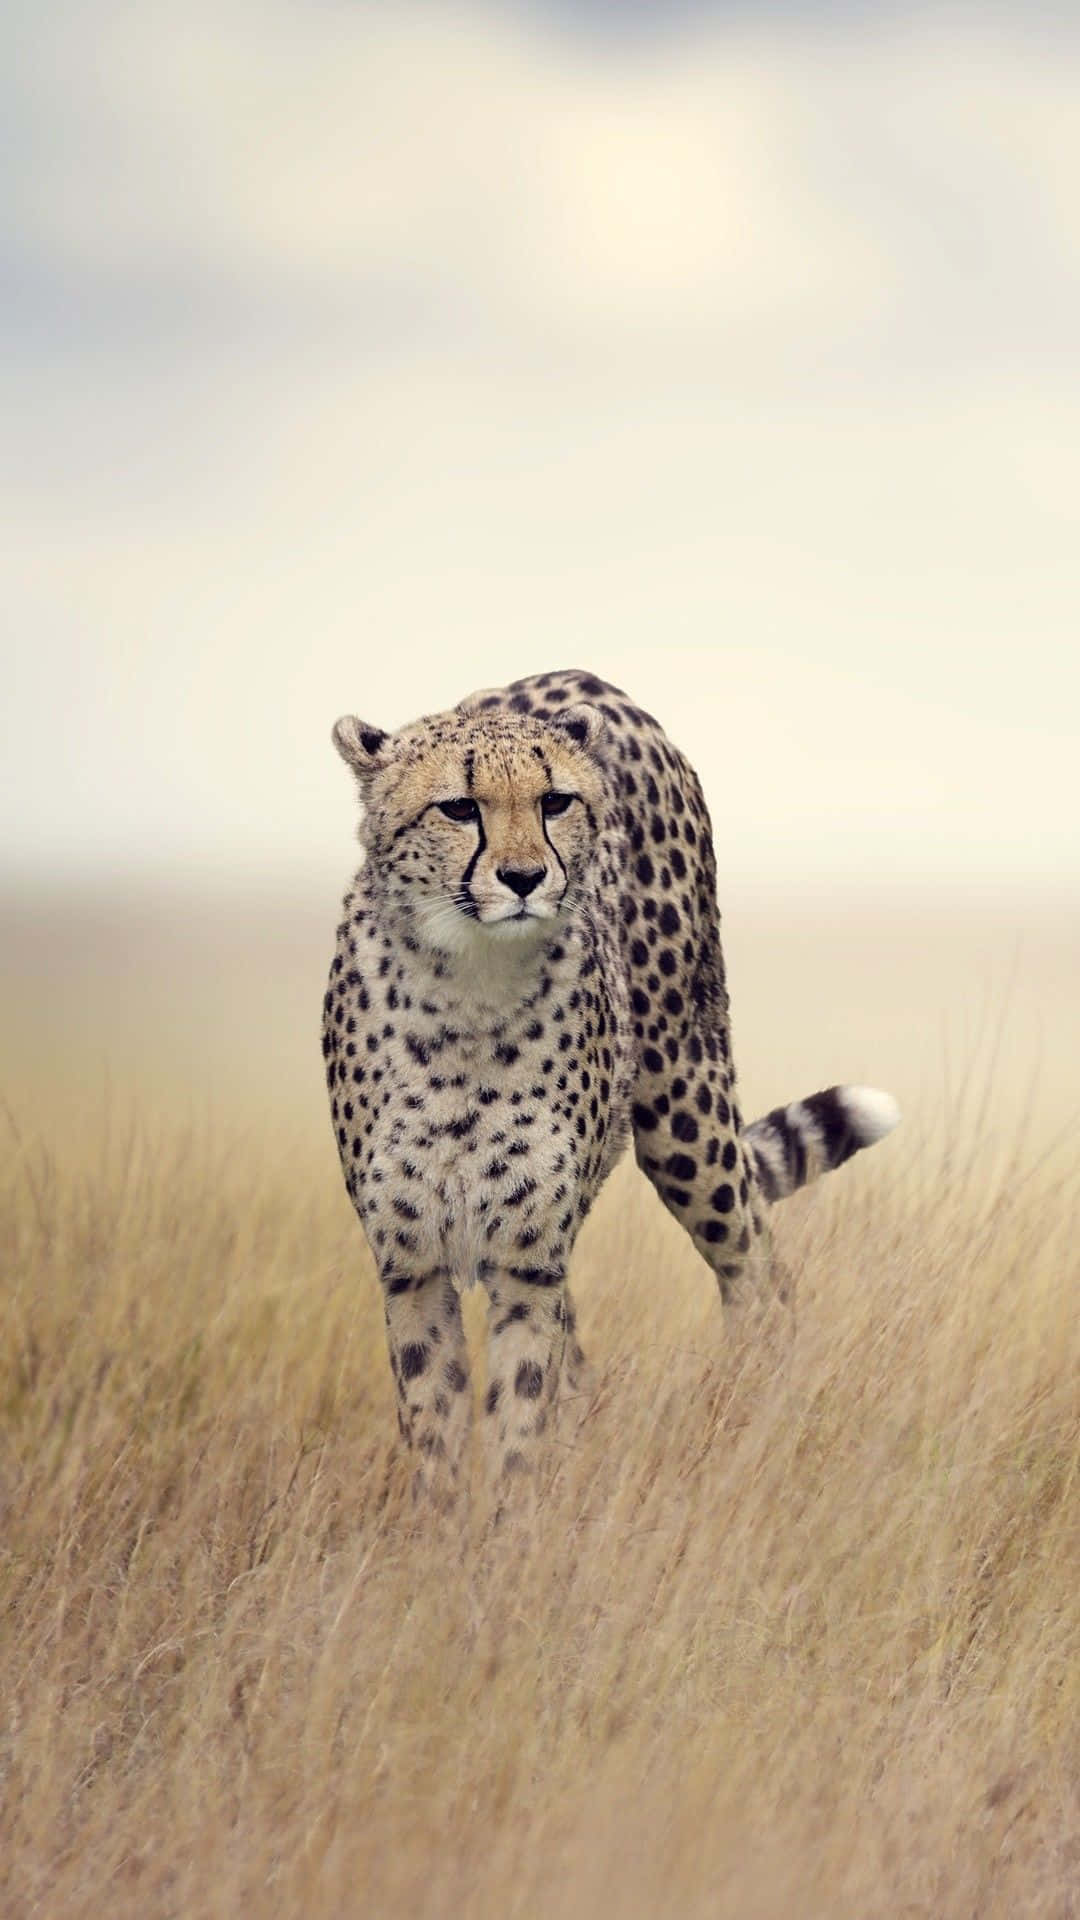 Unveil the latest Cheetah Iphone Wallpaper